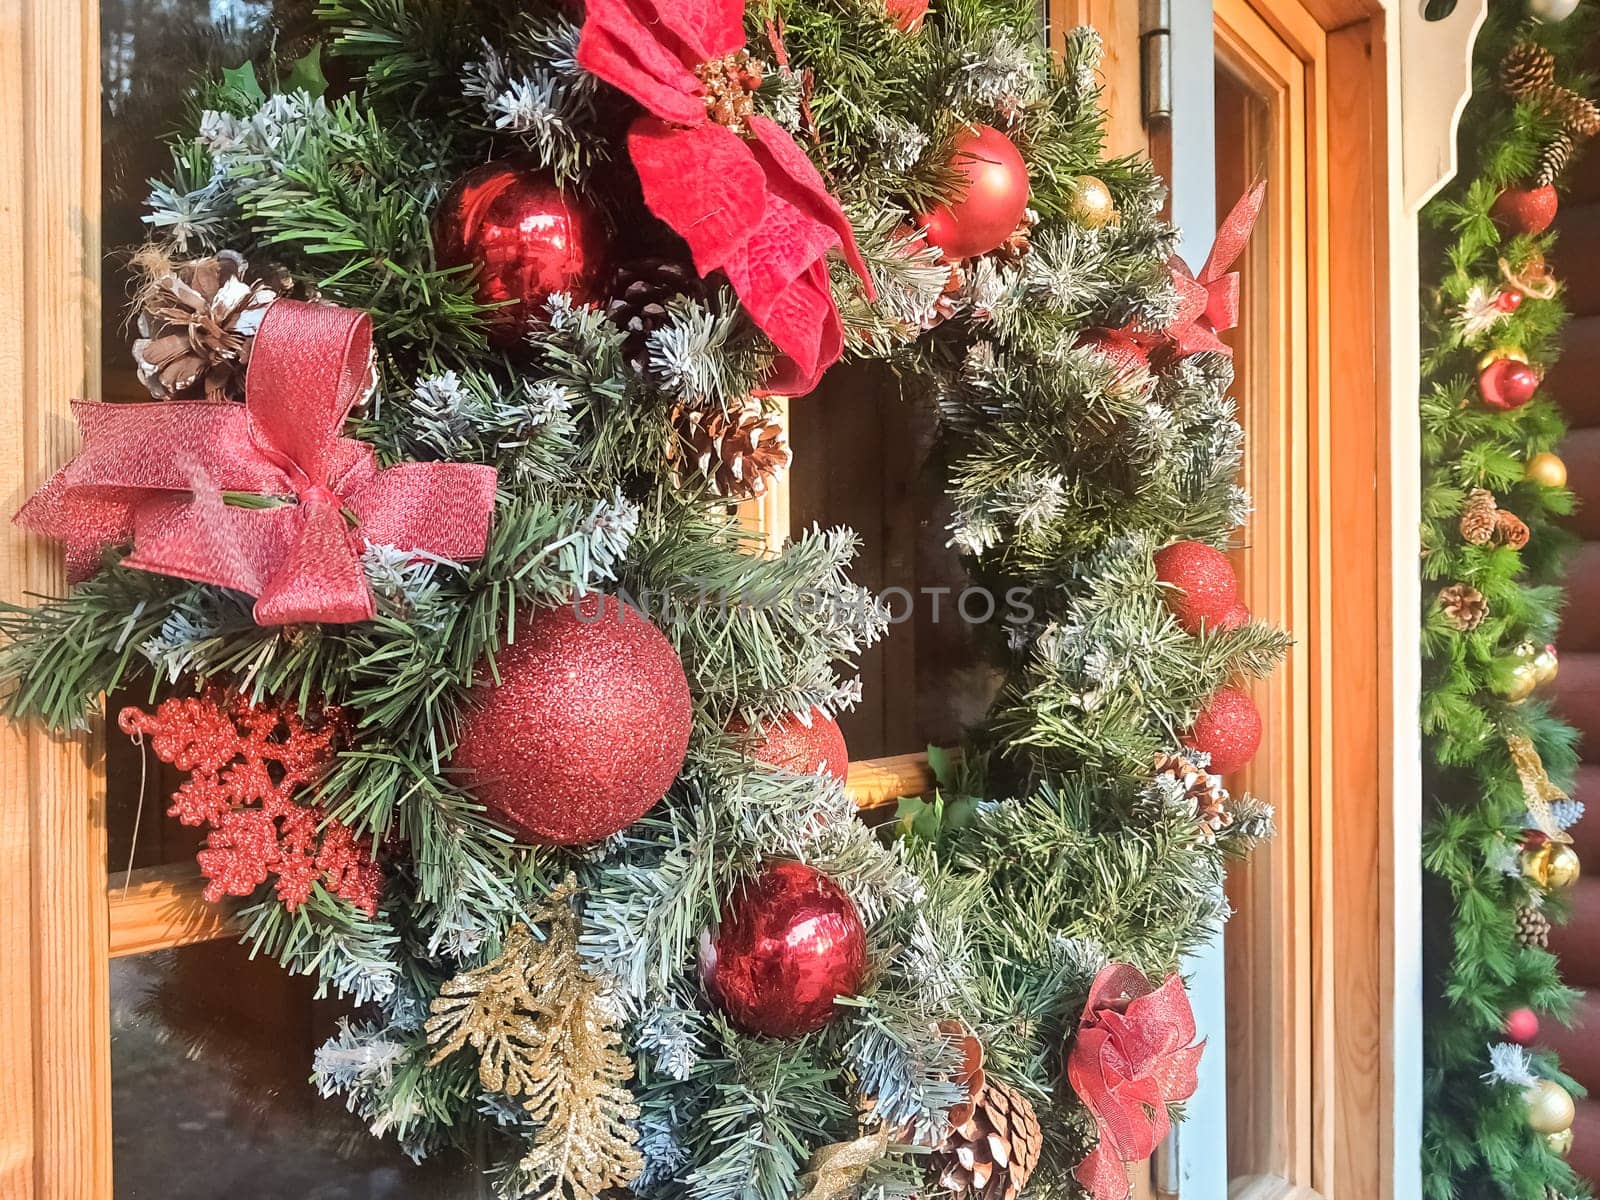 Christmas wreath with red and gold bauble decorations, bow, holly, mistletoe, pine cones and blue spruce fir over dark wood front door background.